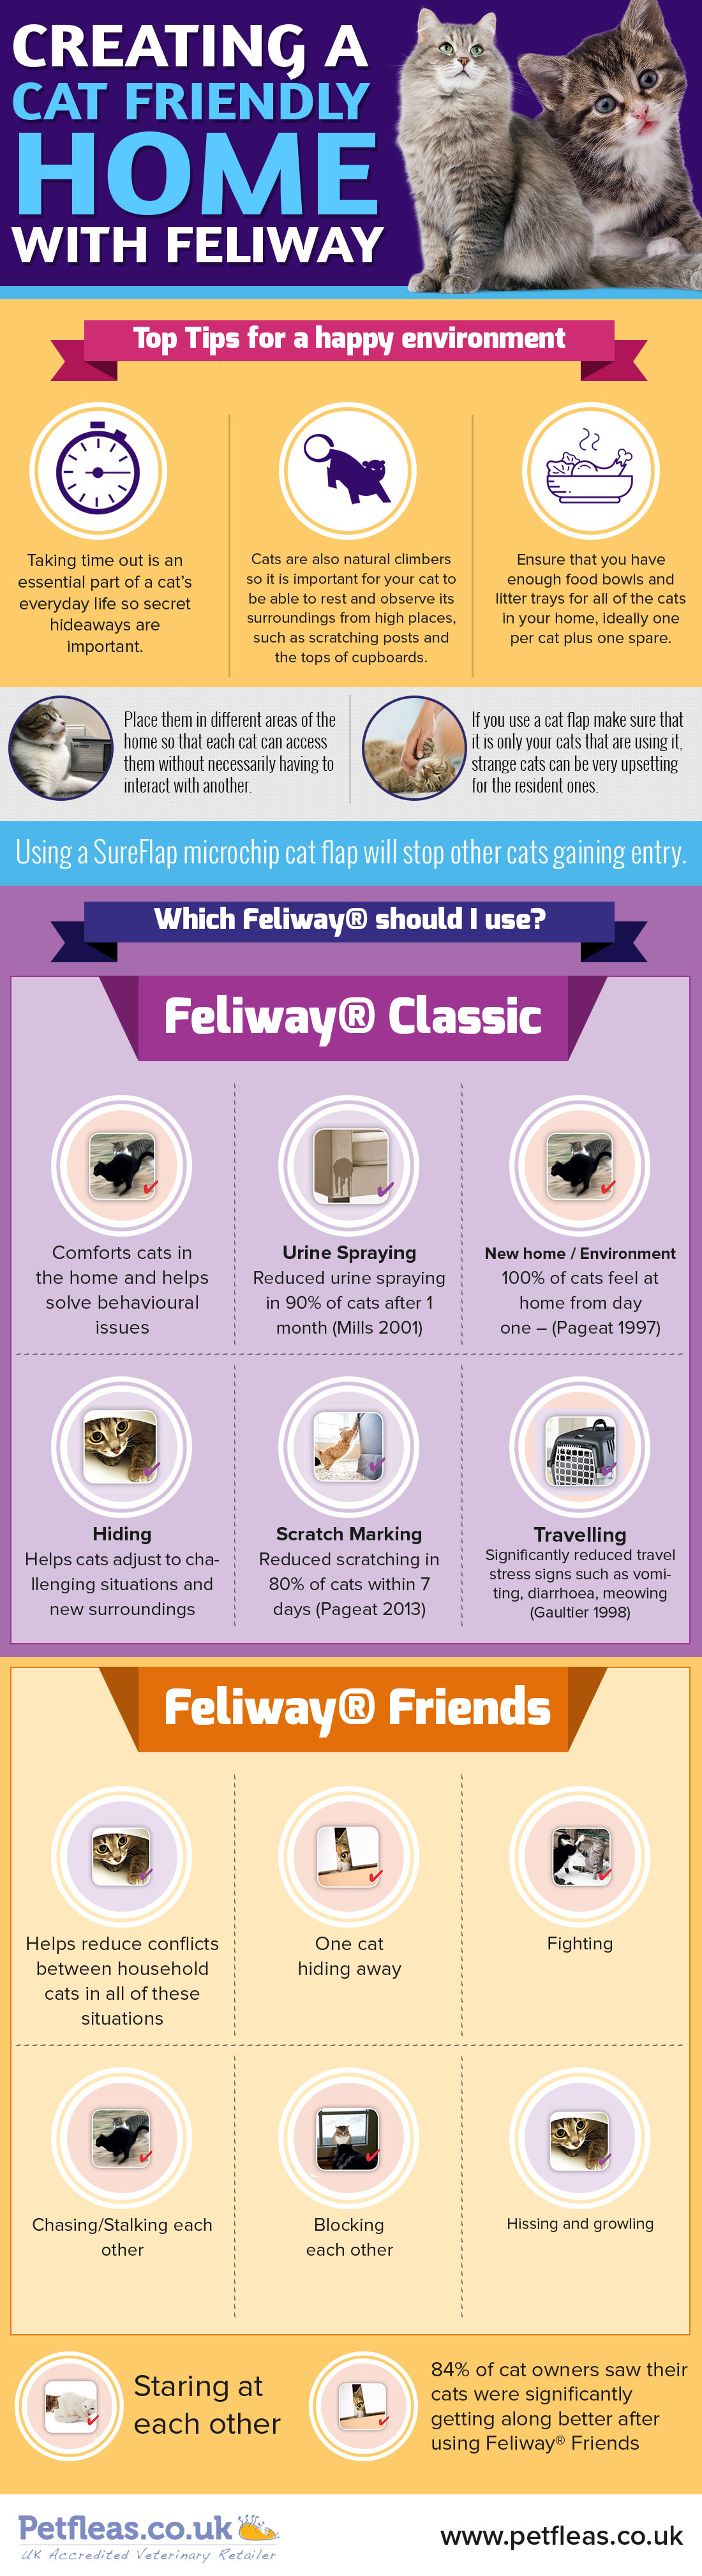 Creating a Cat Friendly Home with Feliway